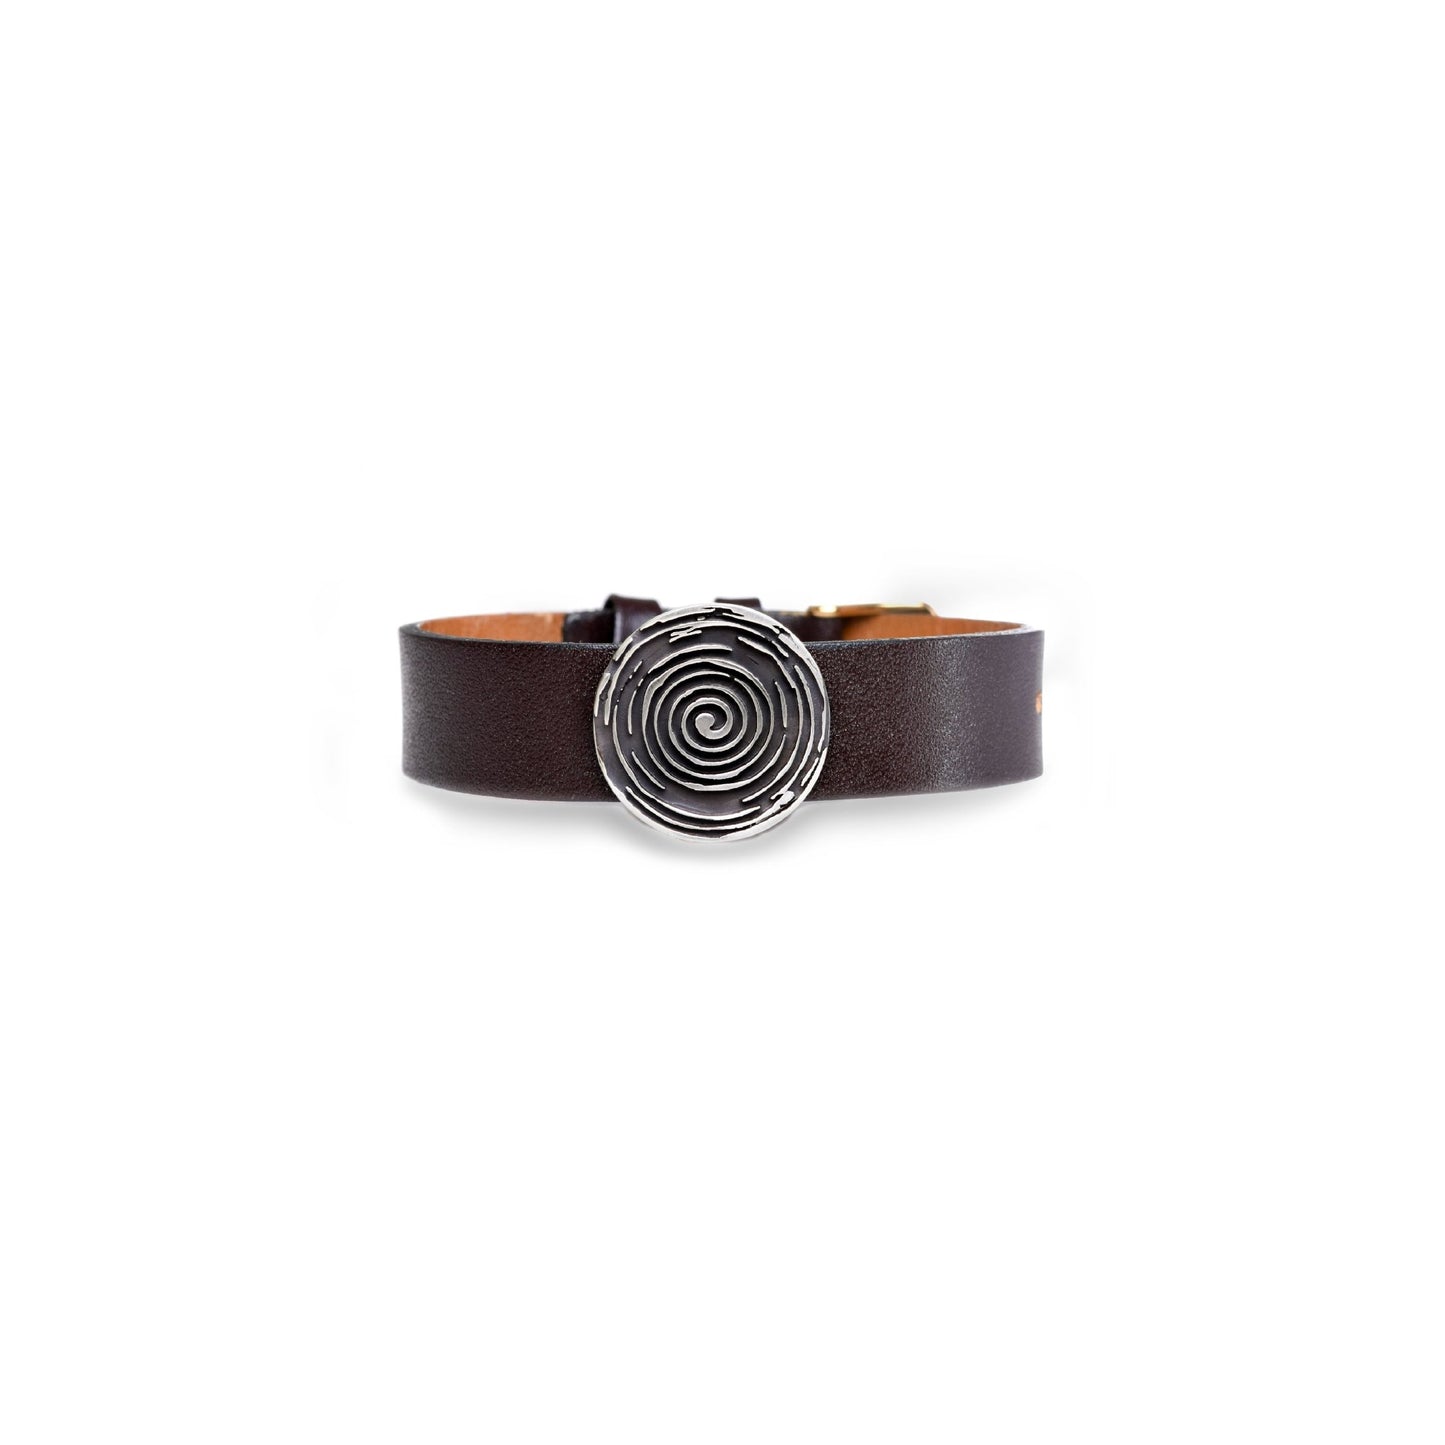 Spiral - Bracelet with leather strap - Bonotee